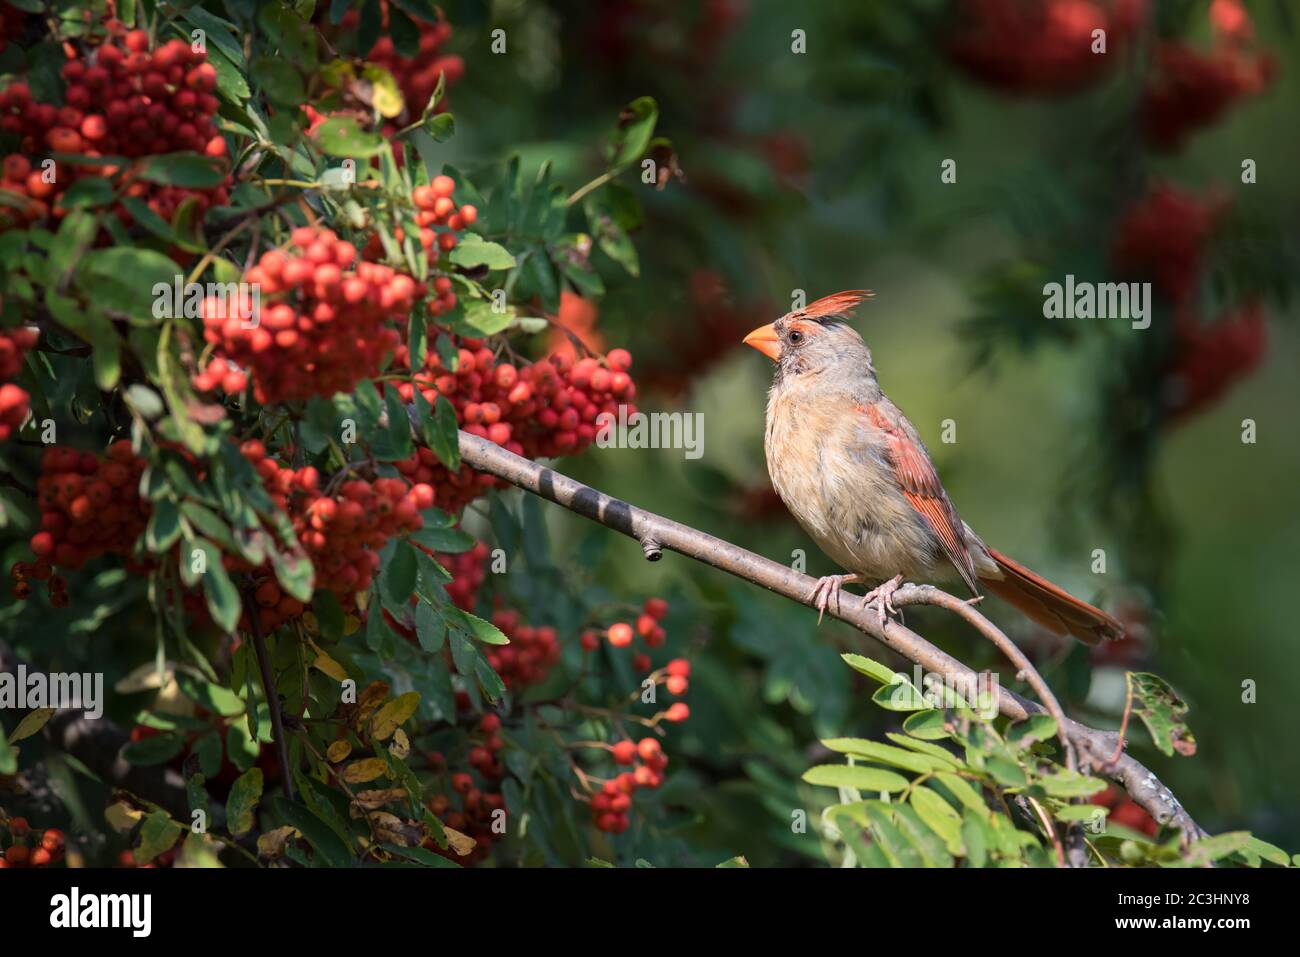 A female Northern Cardinal forages for a meal in a Mountain Ash tree laden with autumn berries at Rosetta McClain Gardens in Toronto, Ontario. Stock Photo